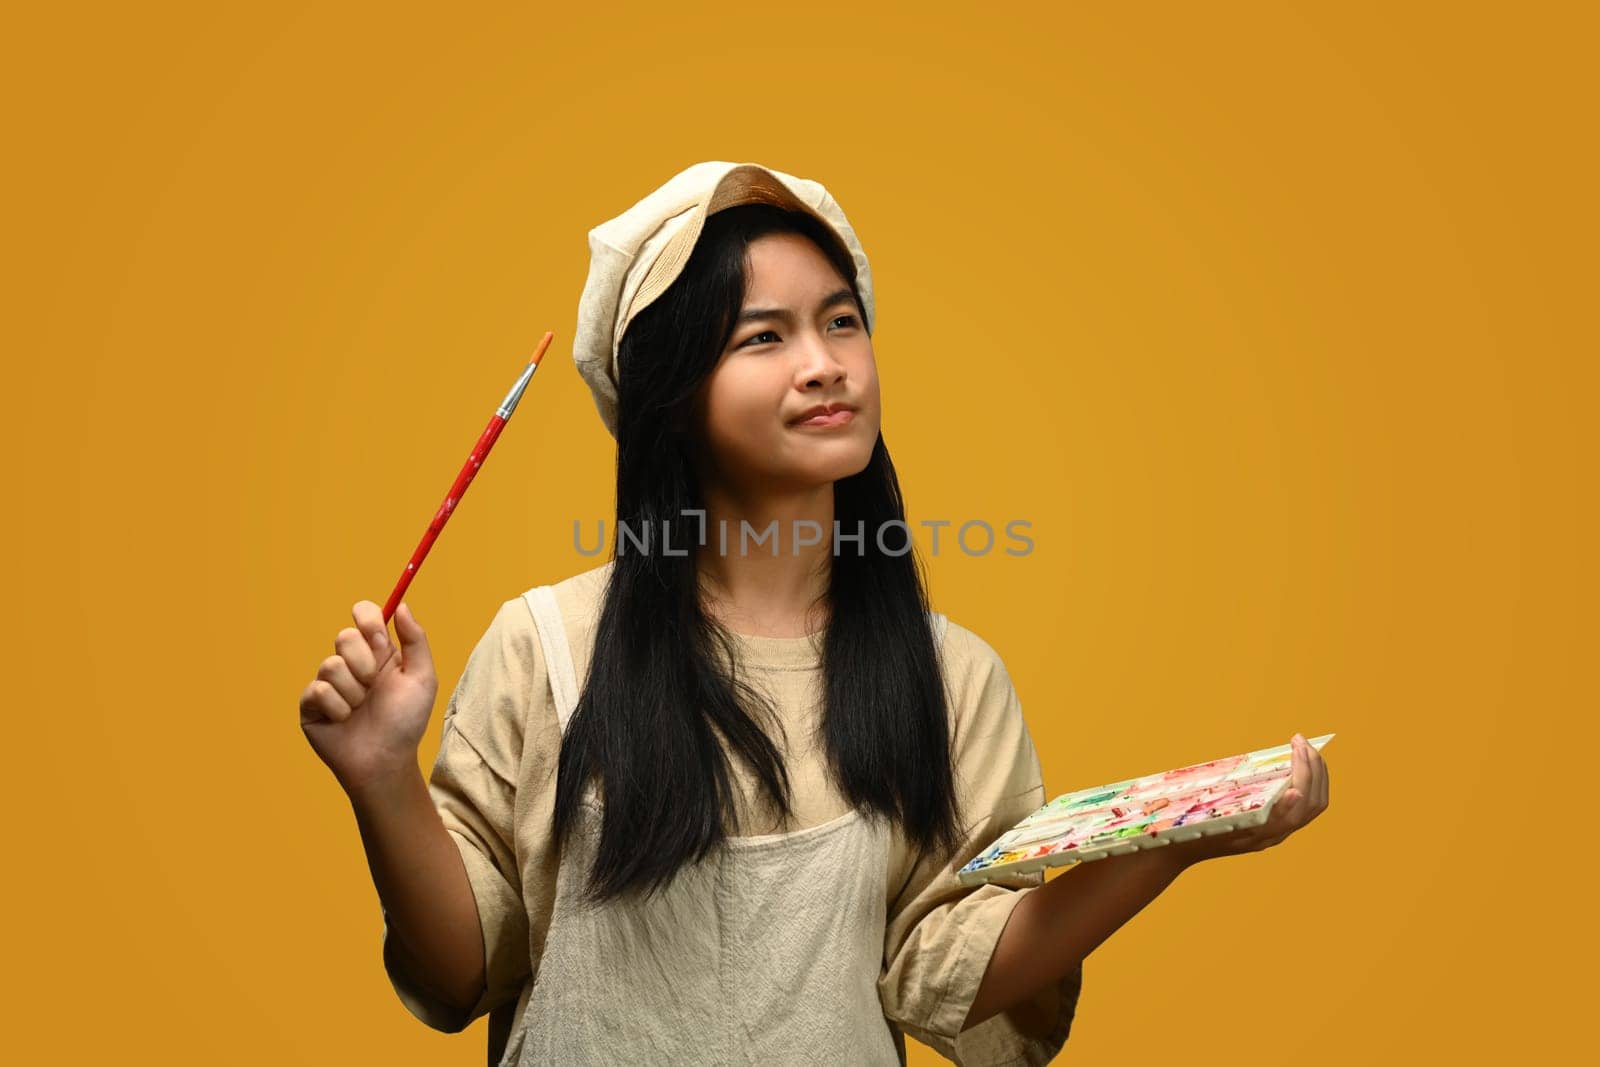 Cheerful teenage Asian girl holding palette and paint brushes on yellow background. Art, creativity and education concept.